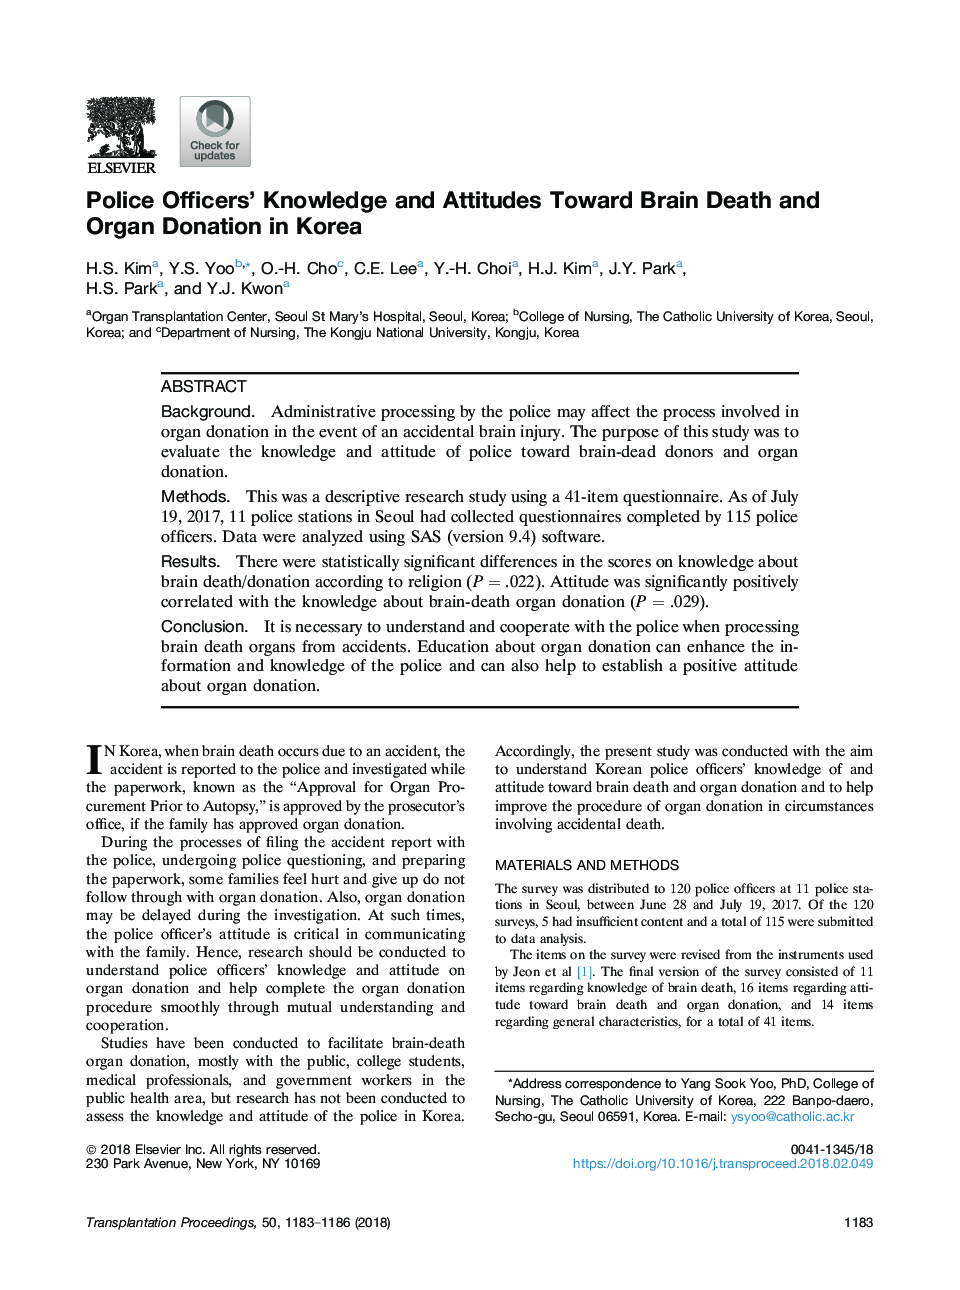 Police Officers' Knowledge and Attitudes Toward Brain Death and Organ Donation in Korea